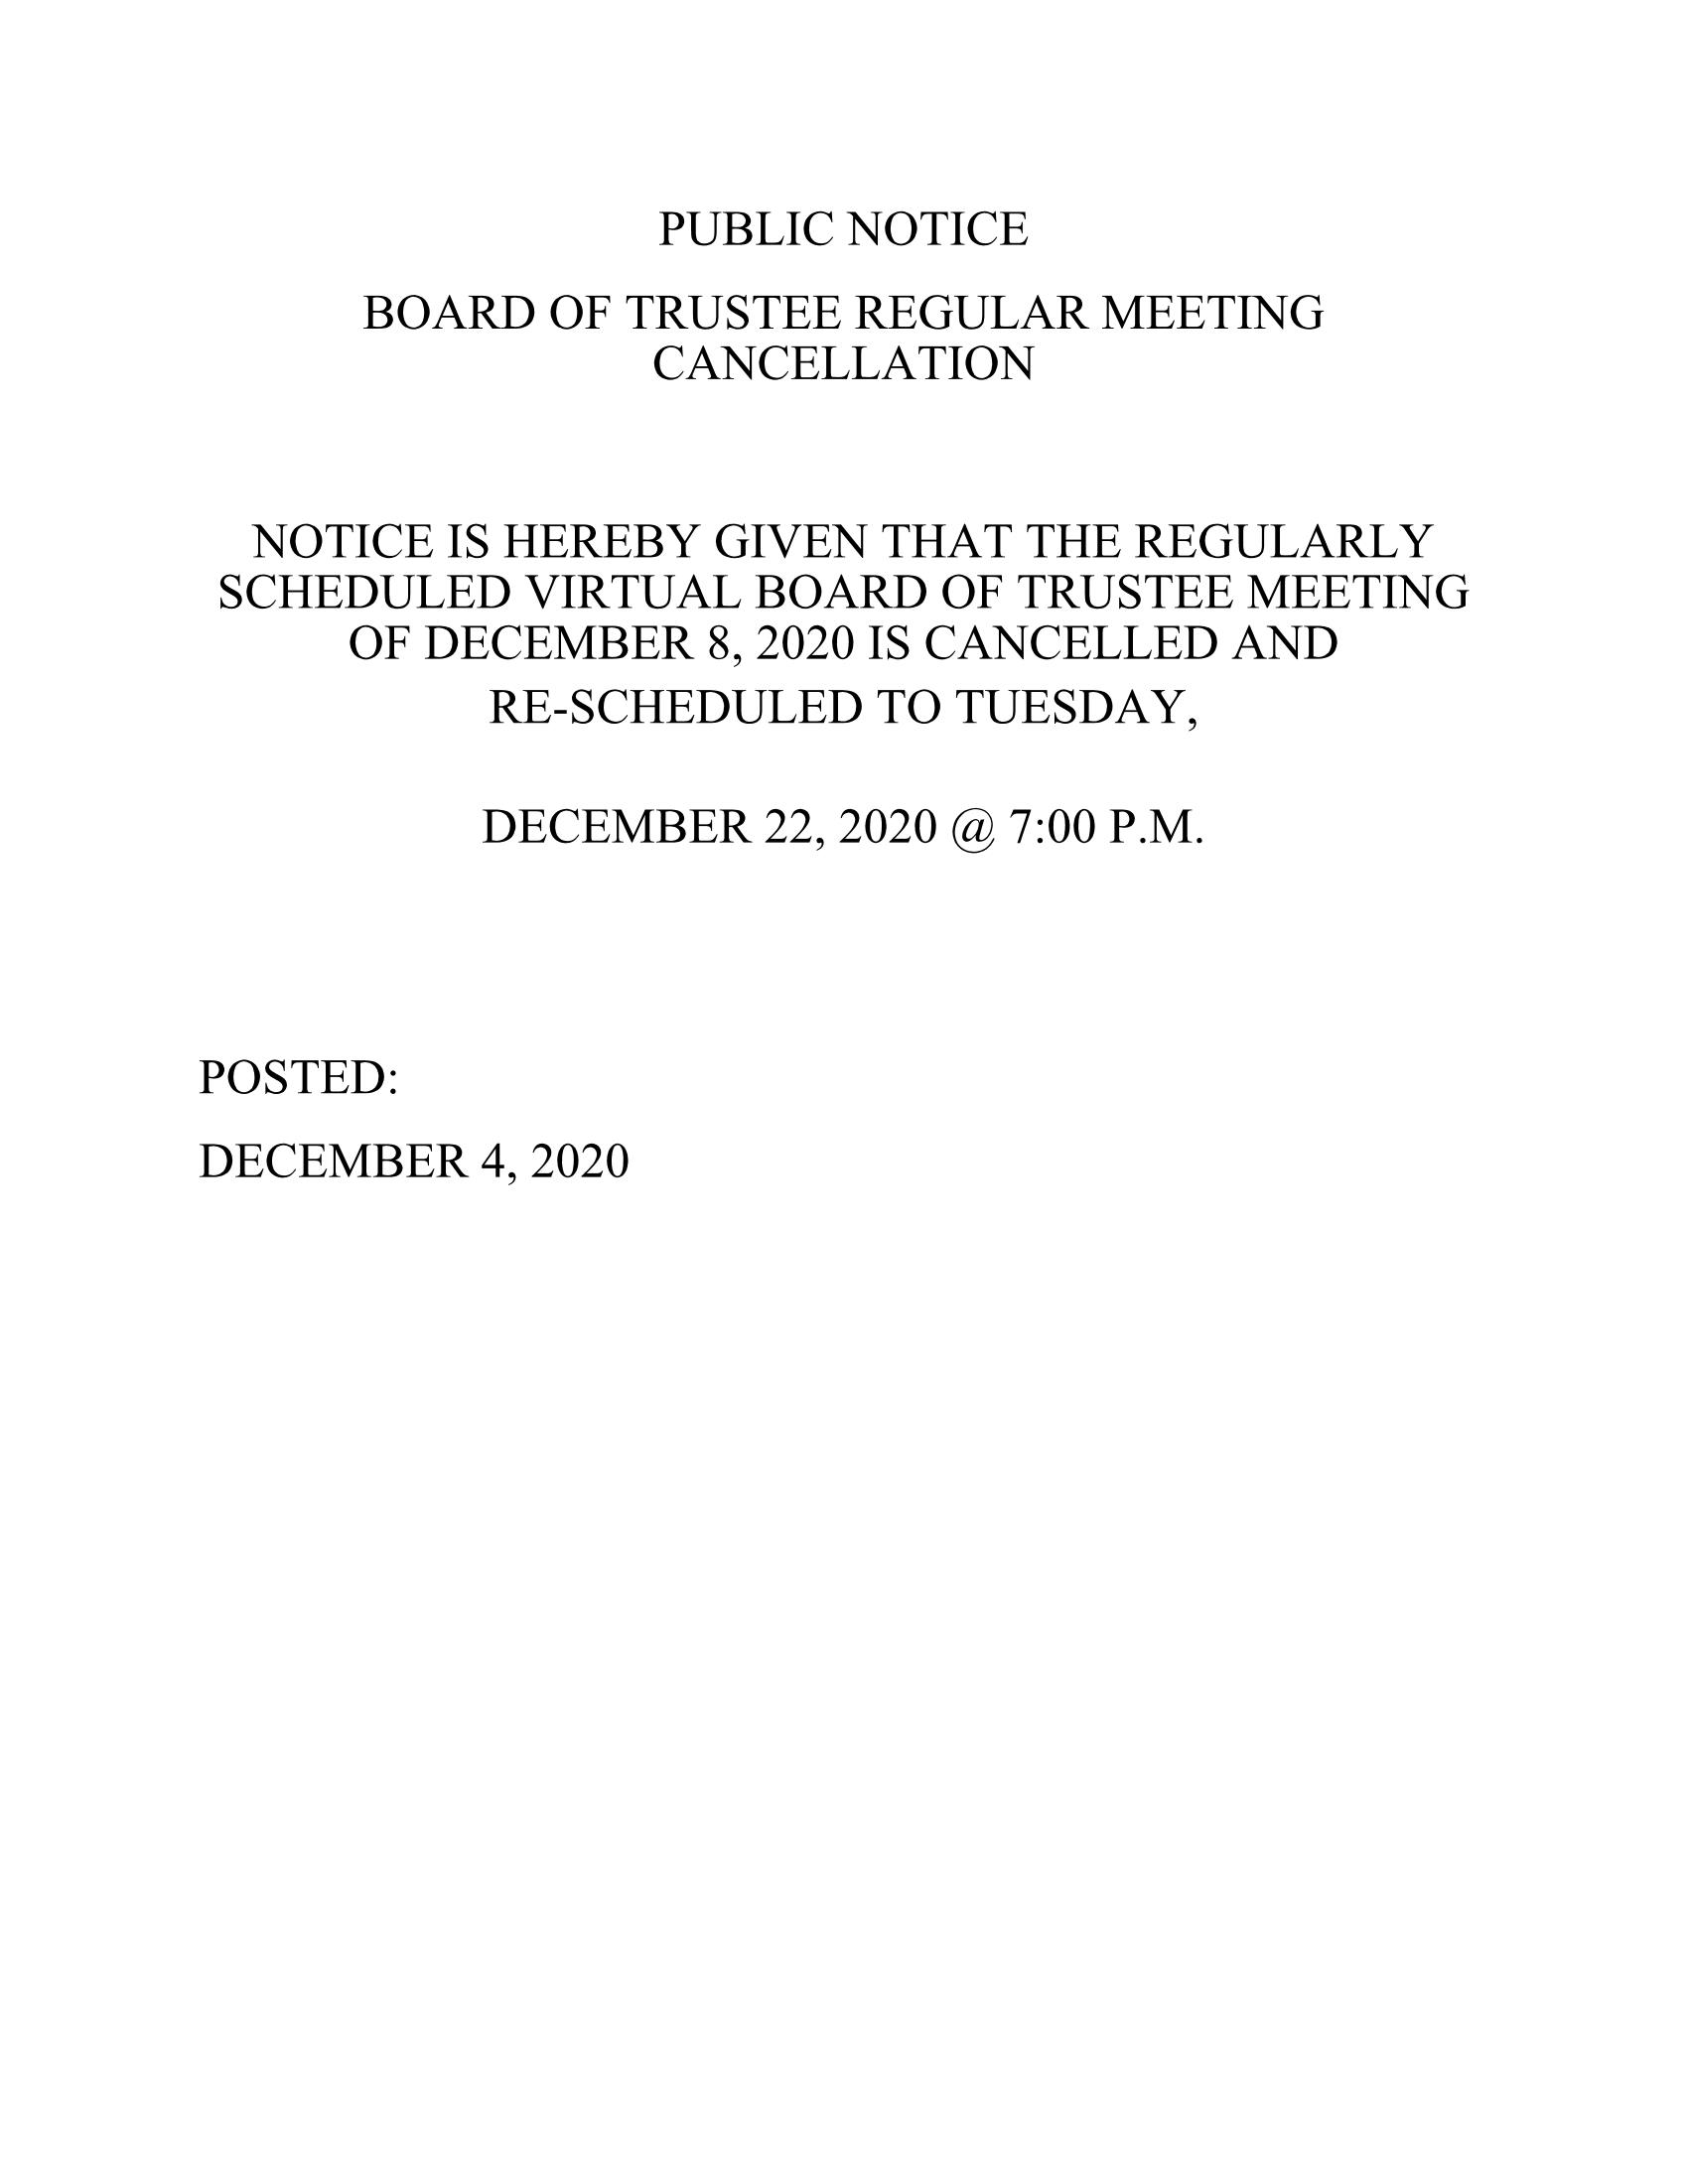 2020 CANCELLATION OF BOT MEETING 12-08)_Page_1